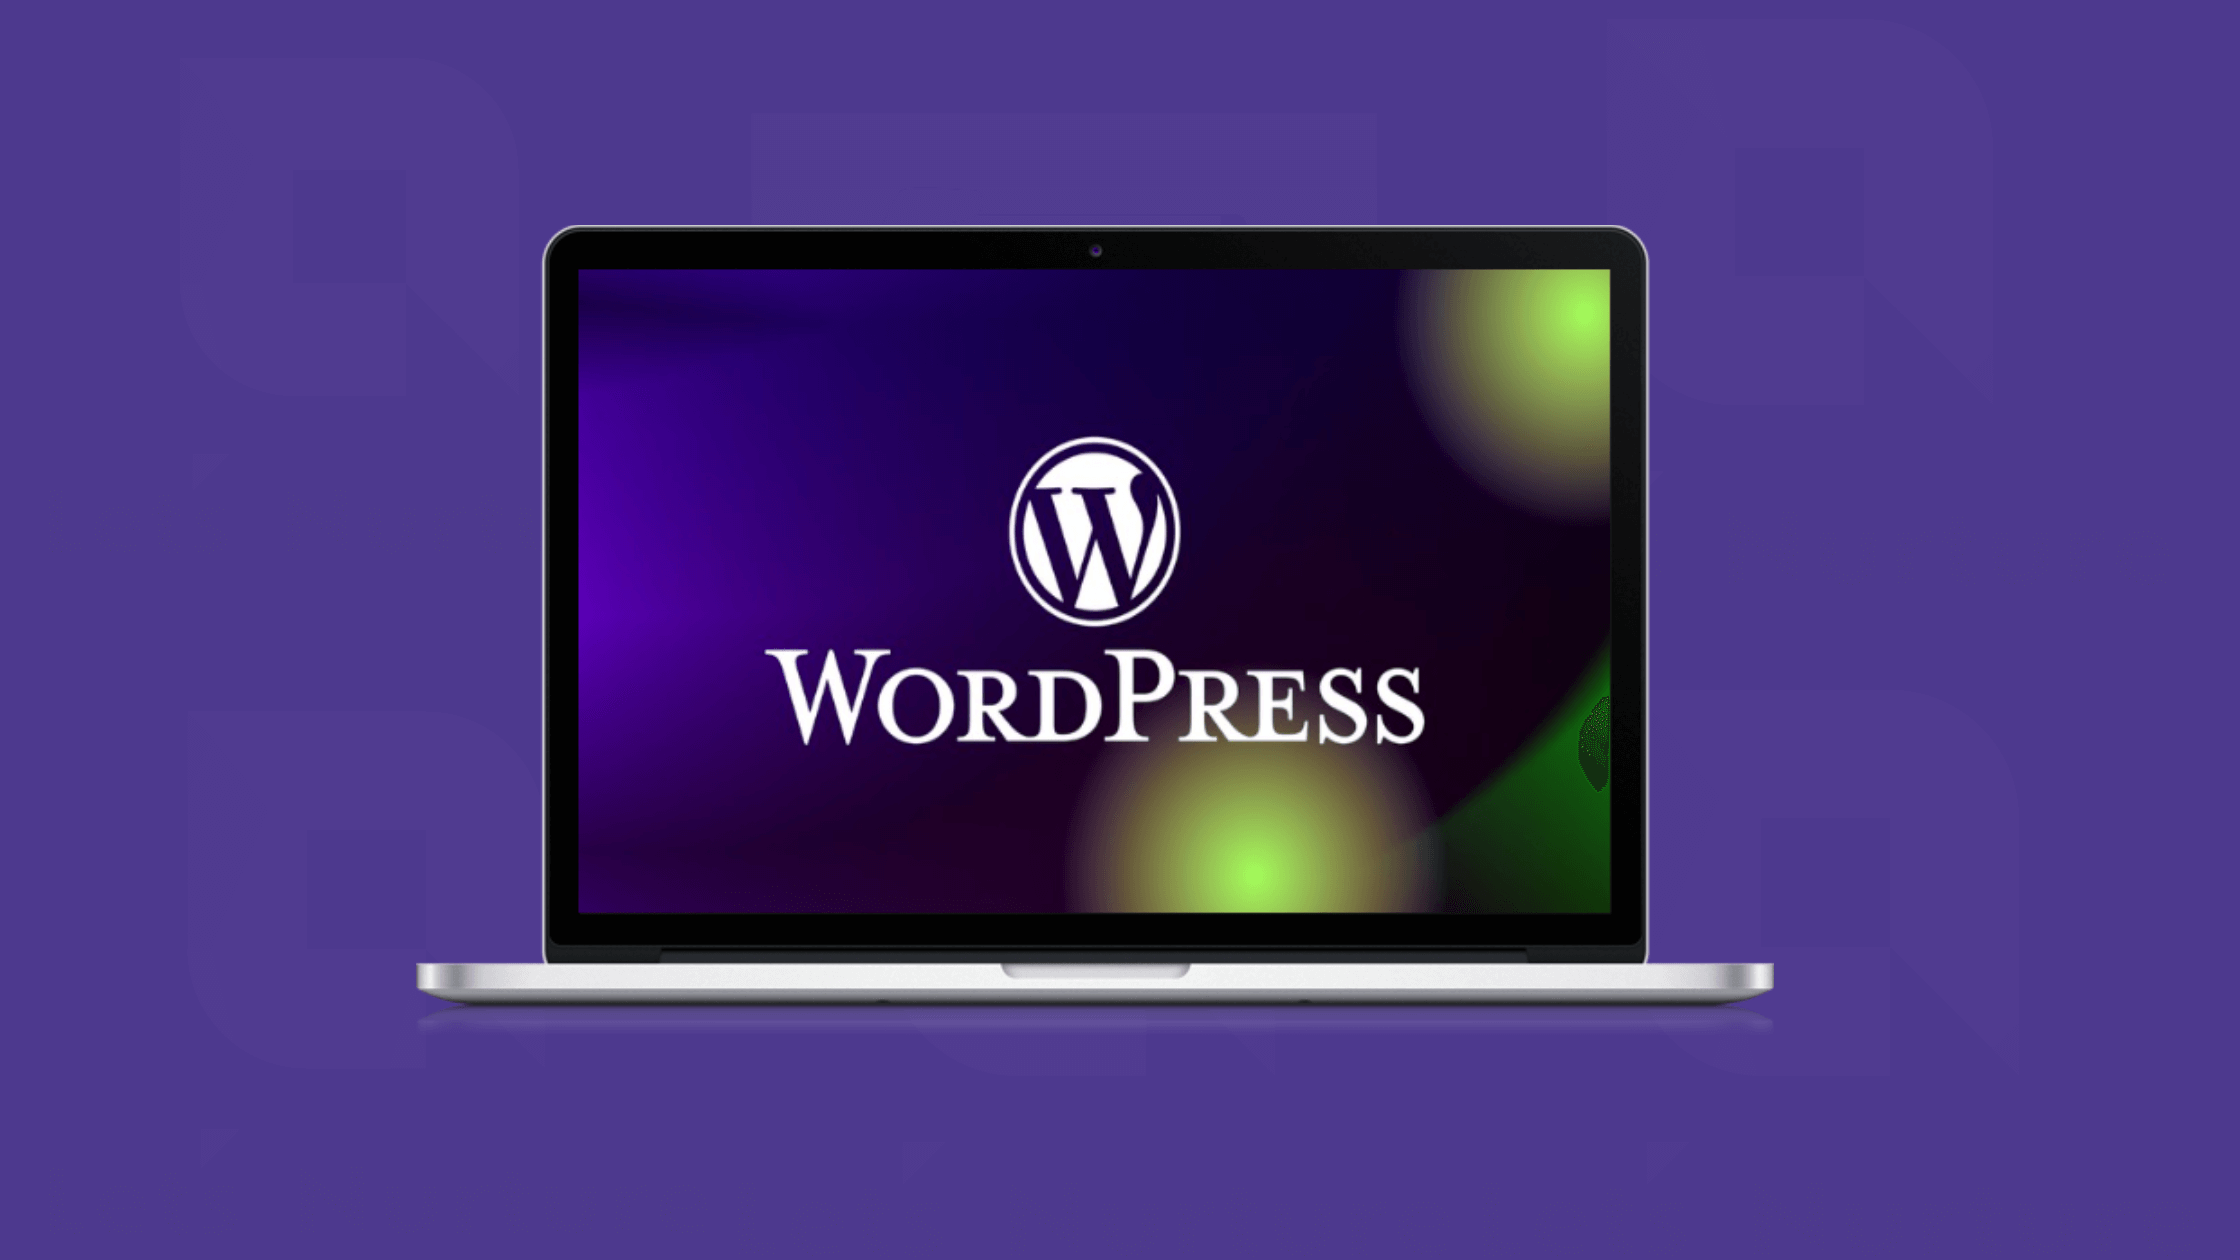 WordPress 2024: Predictions for the Future of Web Publishing